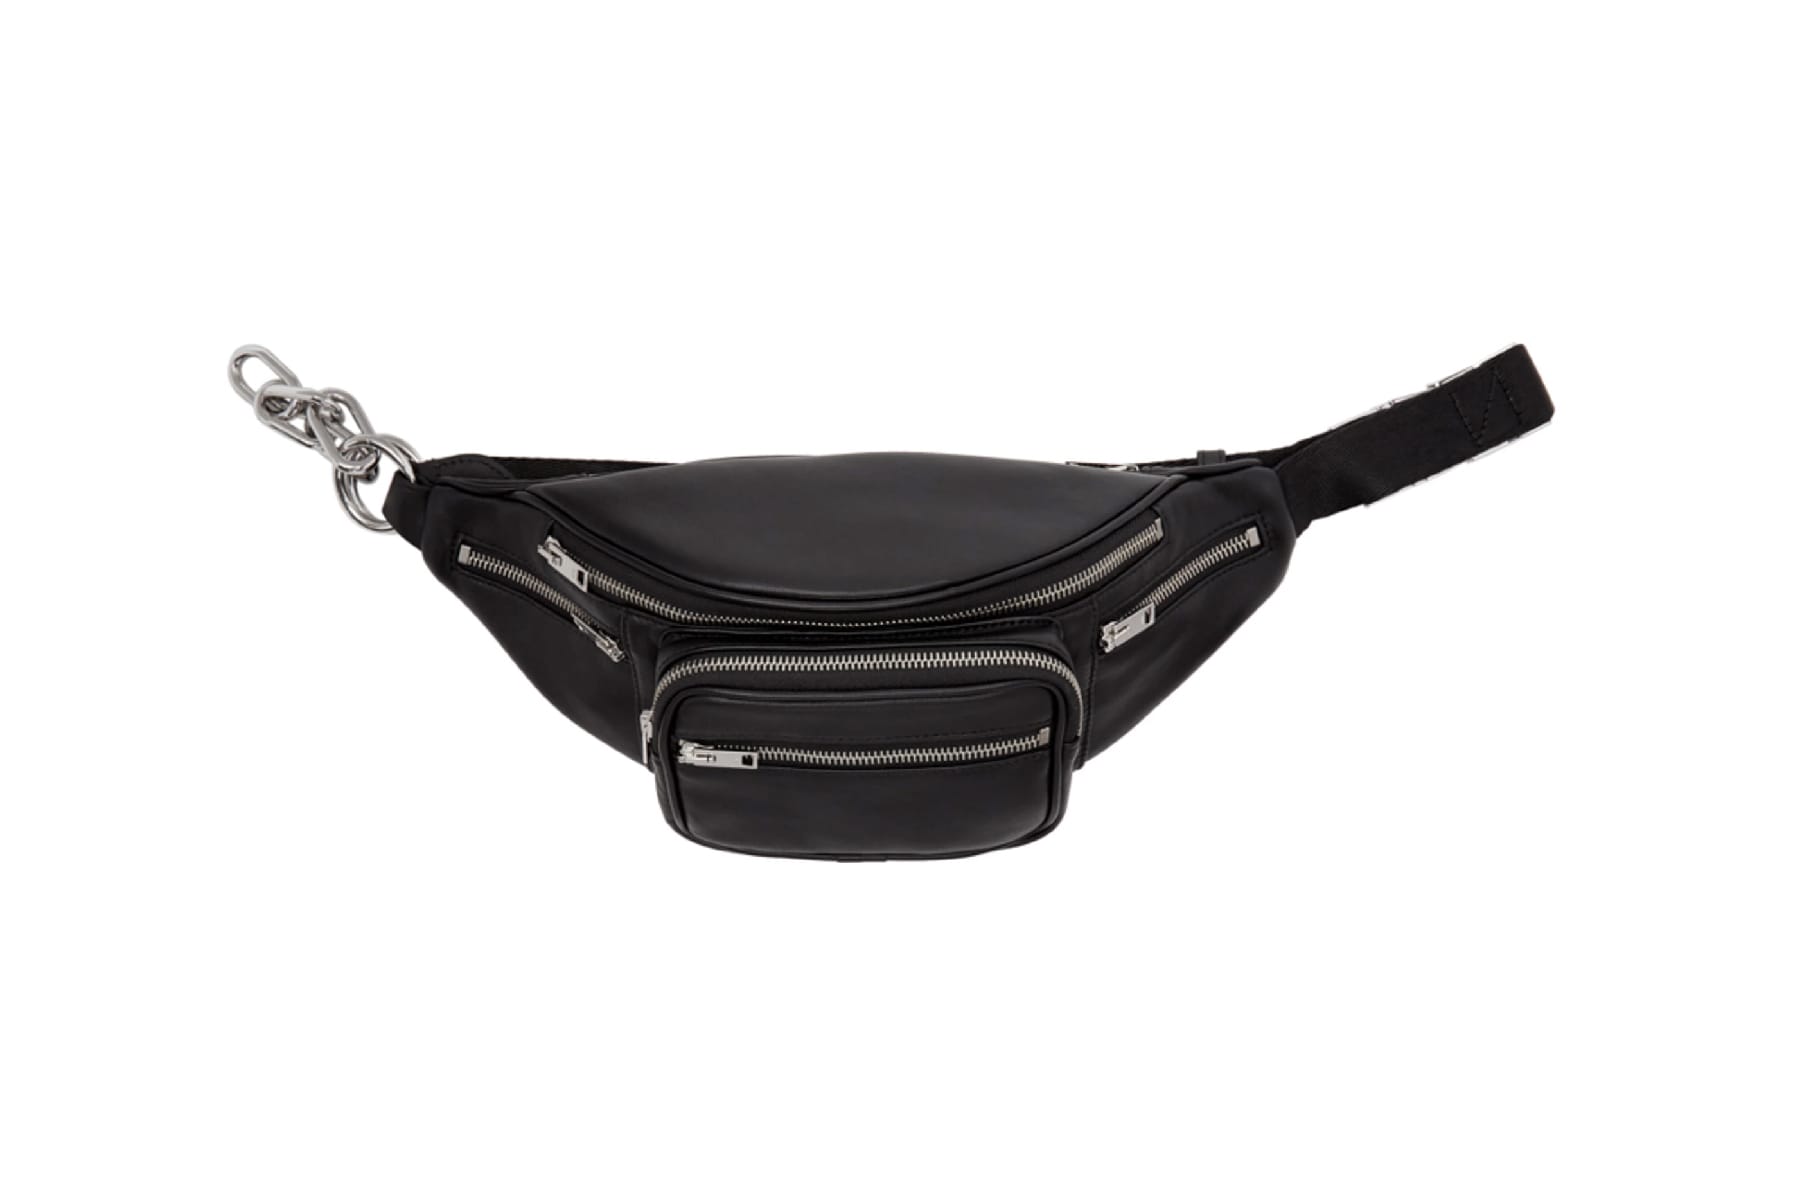 Alexander Wang Fanny Pack Dupe Best Sale, 54% OFF | www.hcb.cat